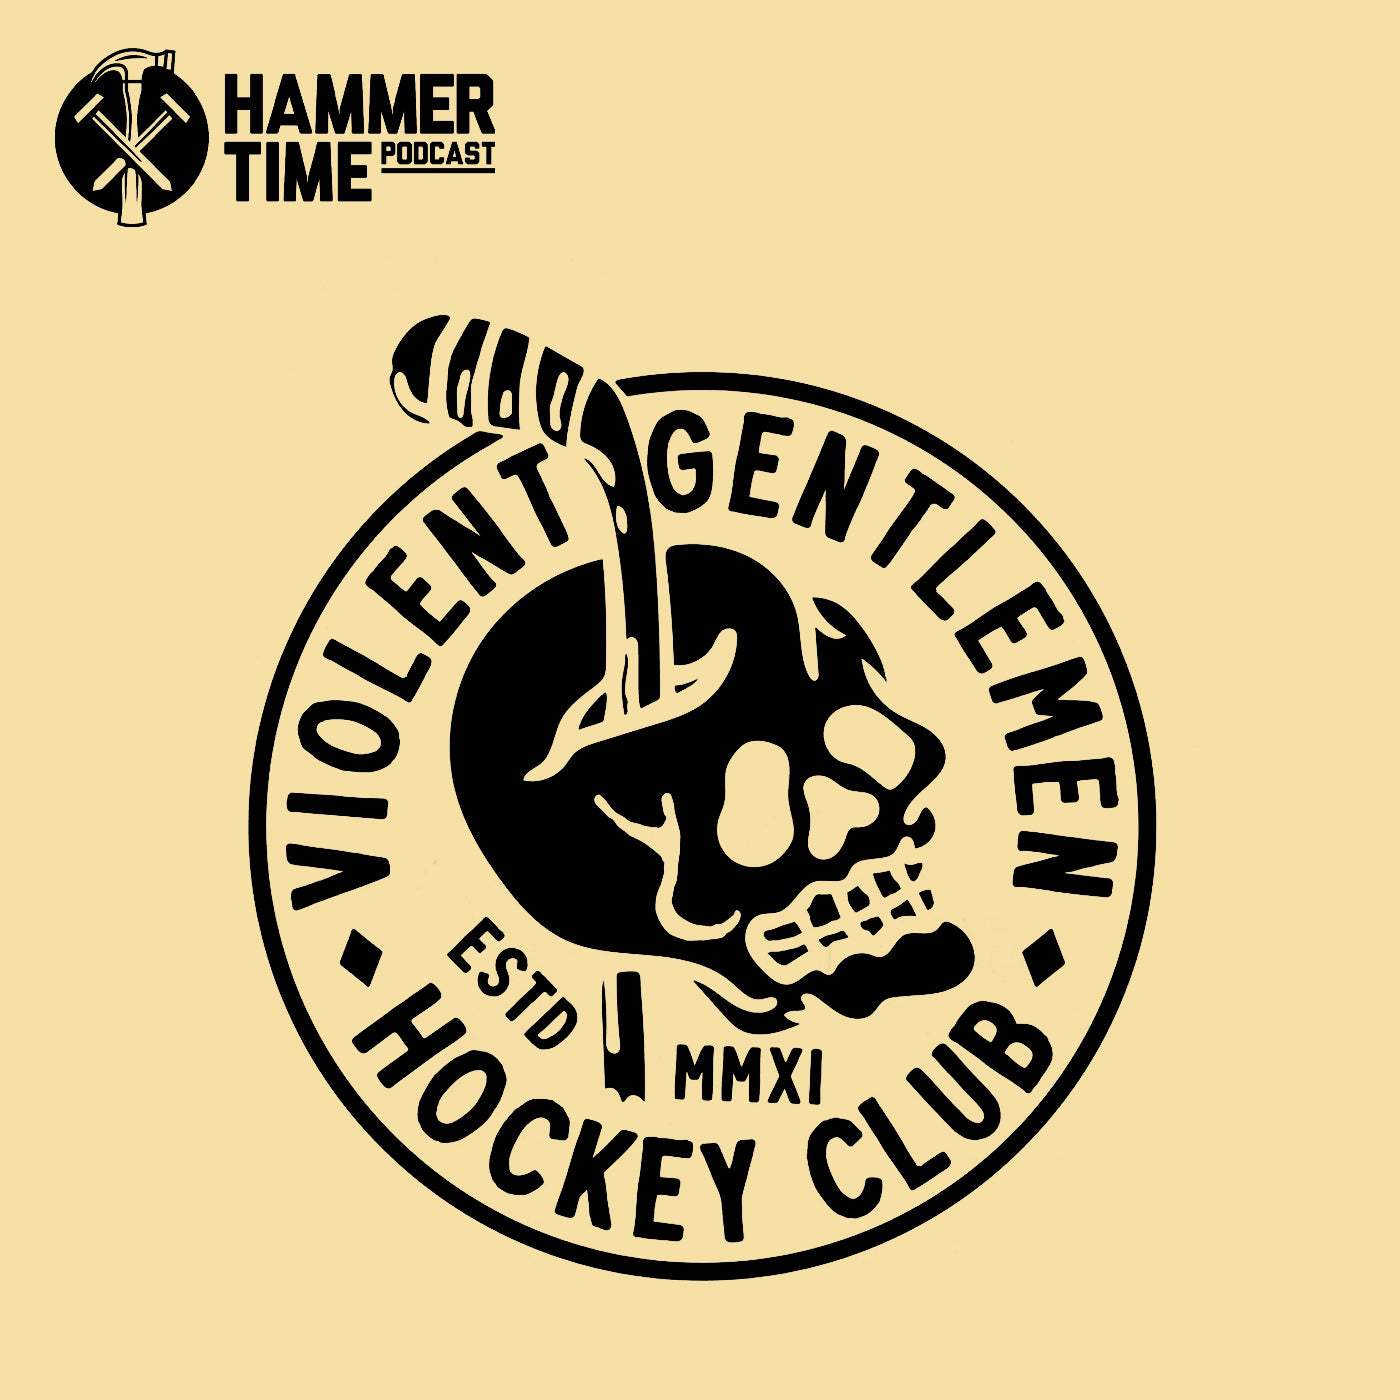 Hammer Time is a weekly podcast produced by Adventures In Design and Lifetipsforbetterliving, where the guys dive deep into the world of sports, business, culture, and fast food.